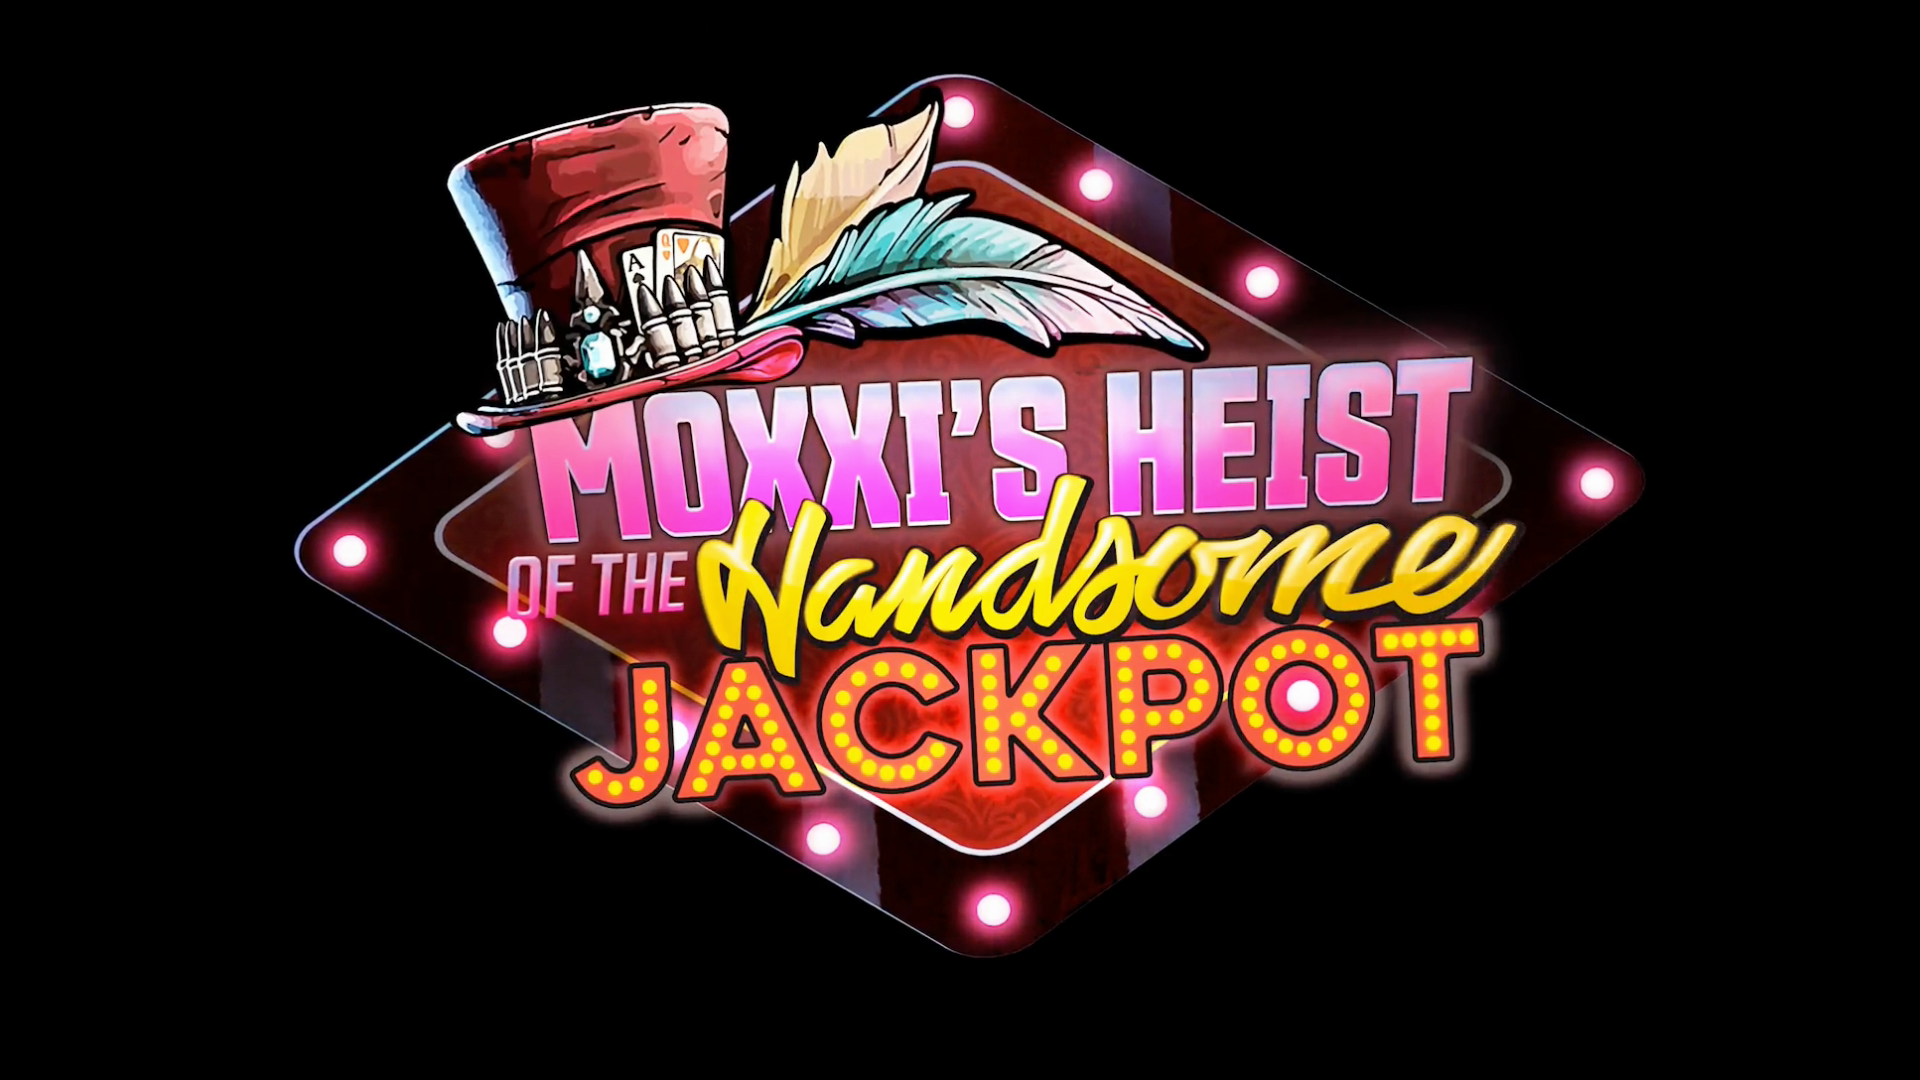 Borderlands 3 – How to Access Moxxi’s Heist of the Handsome Jackpot